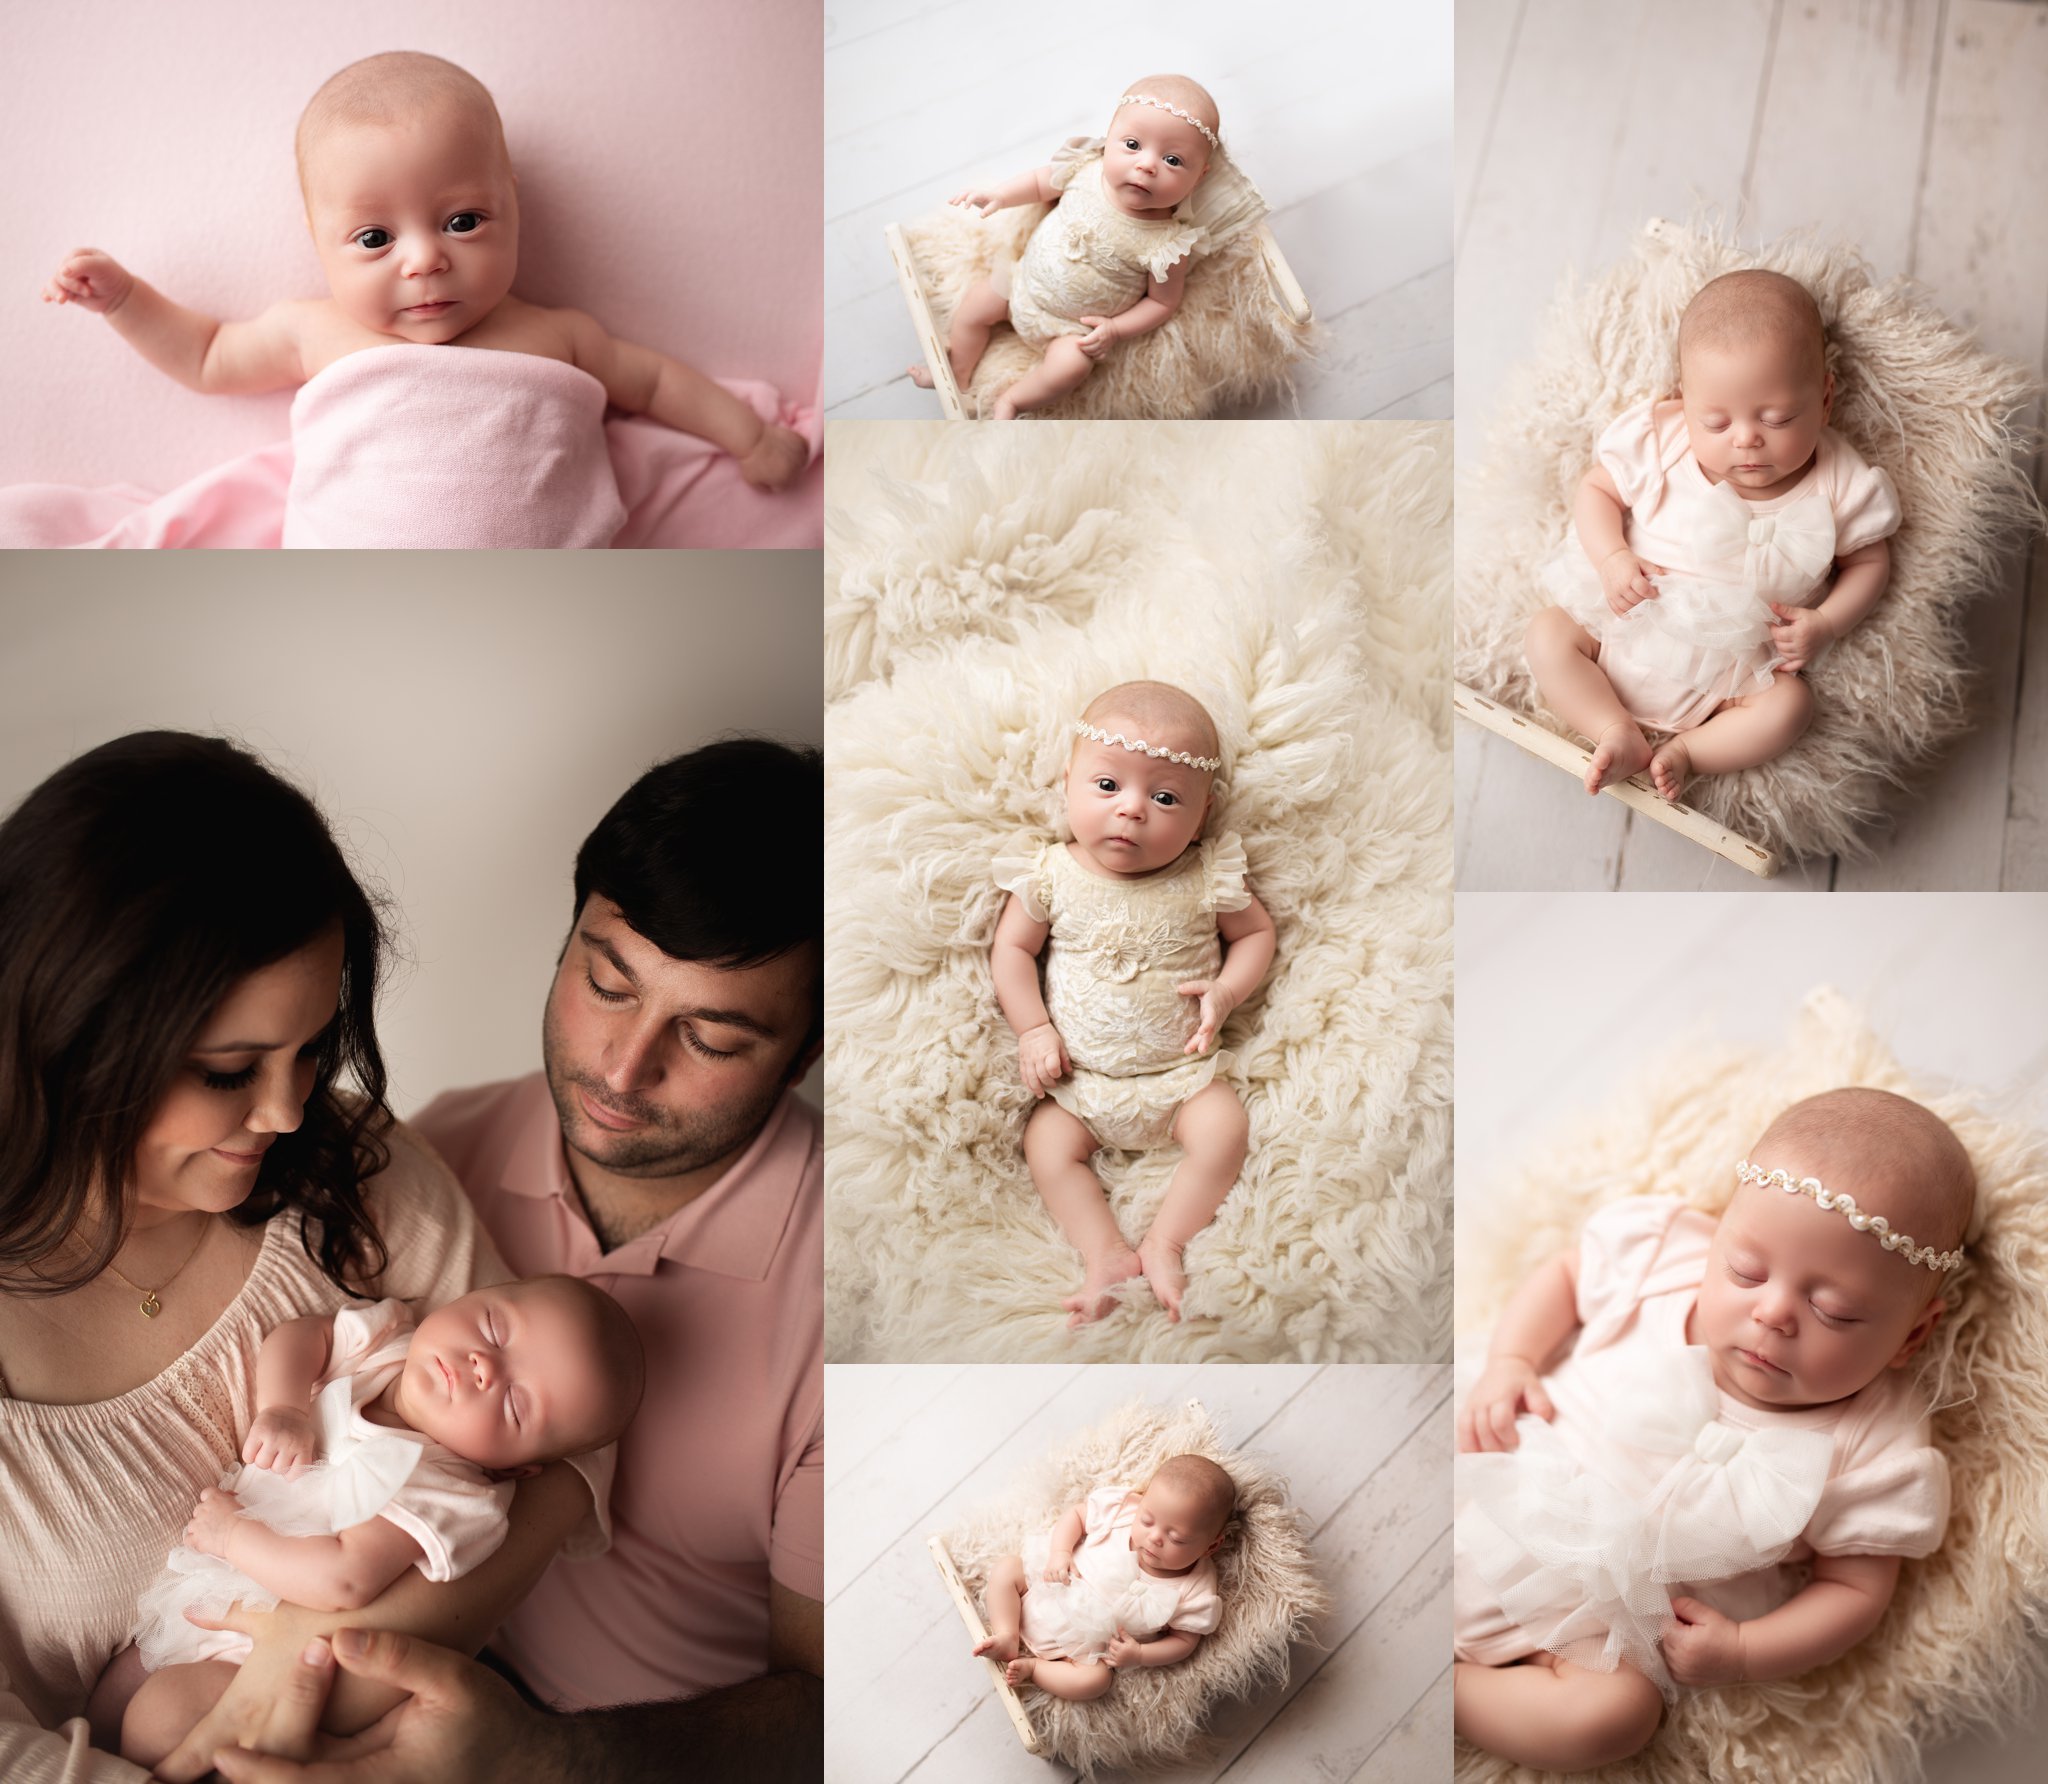 2 month old Baby Photoshoot ideas. - Vanilla Images